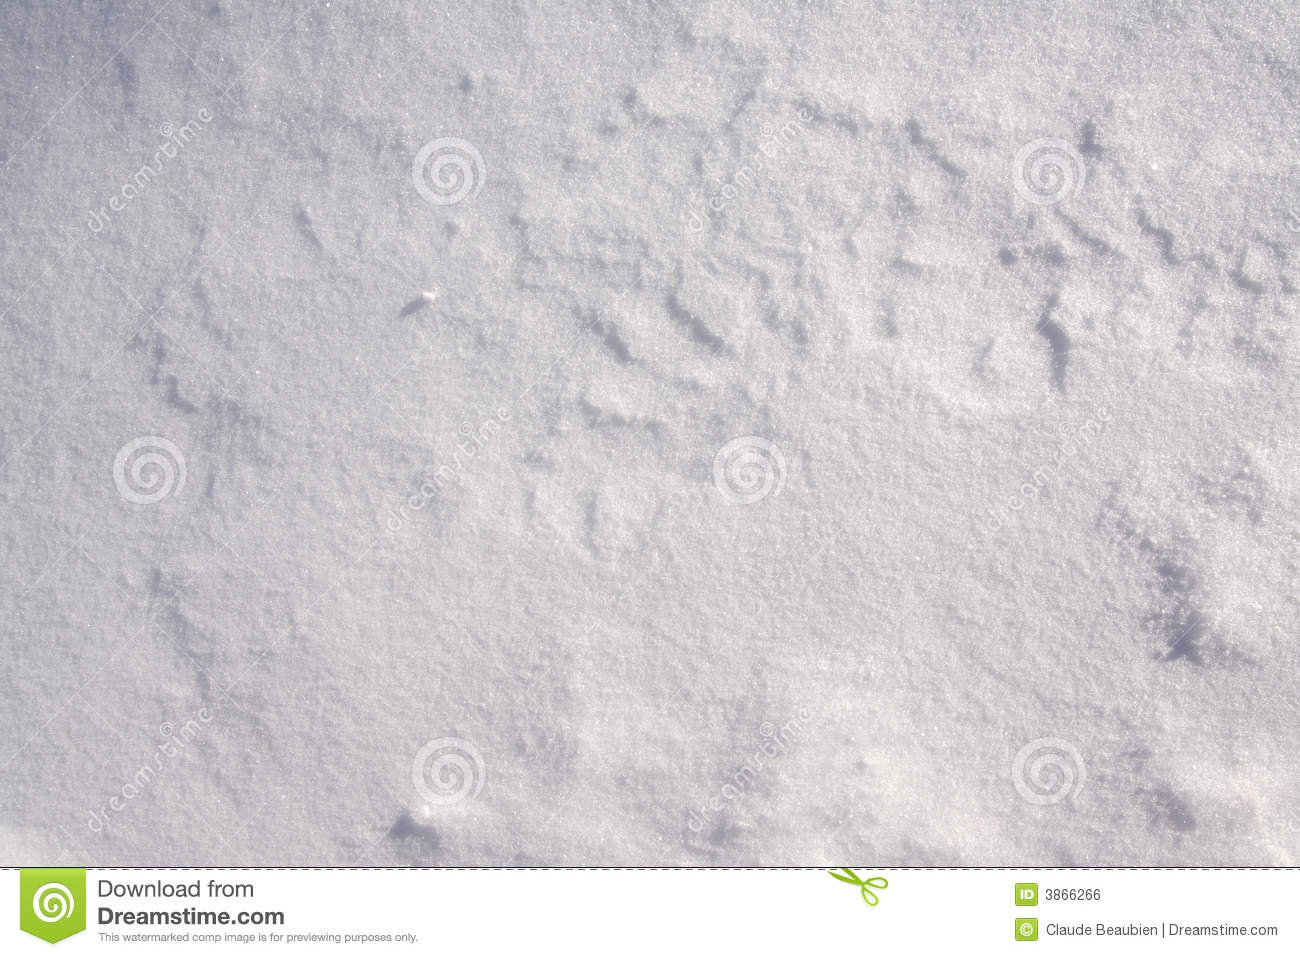 Snowfall White Background Pictures To Pin